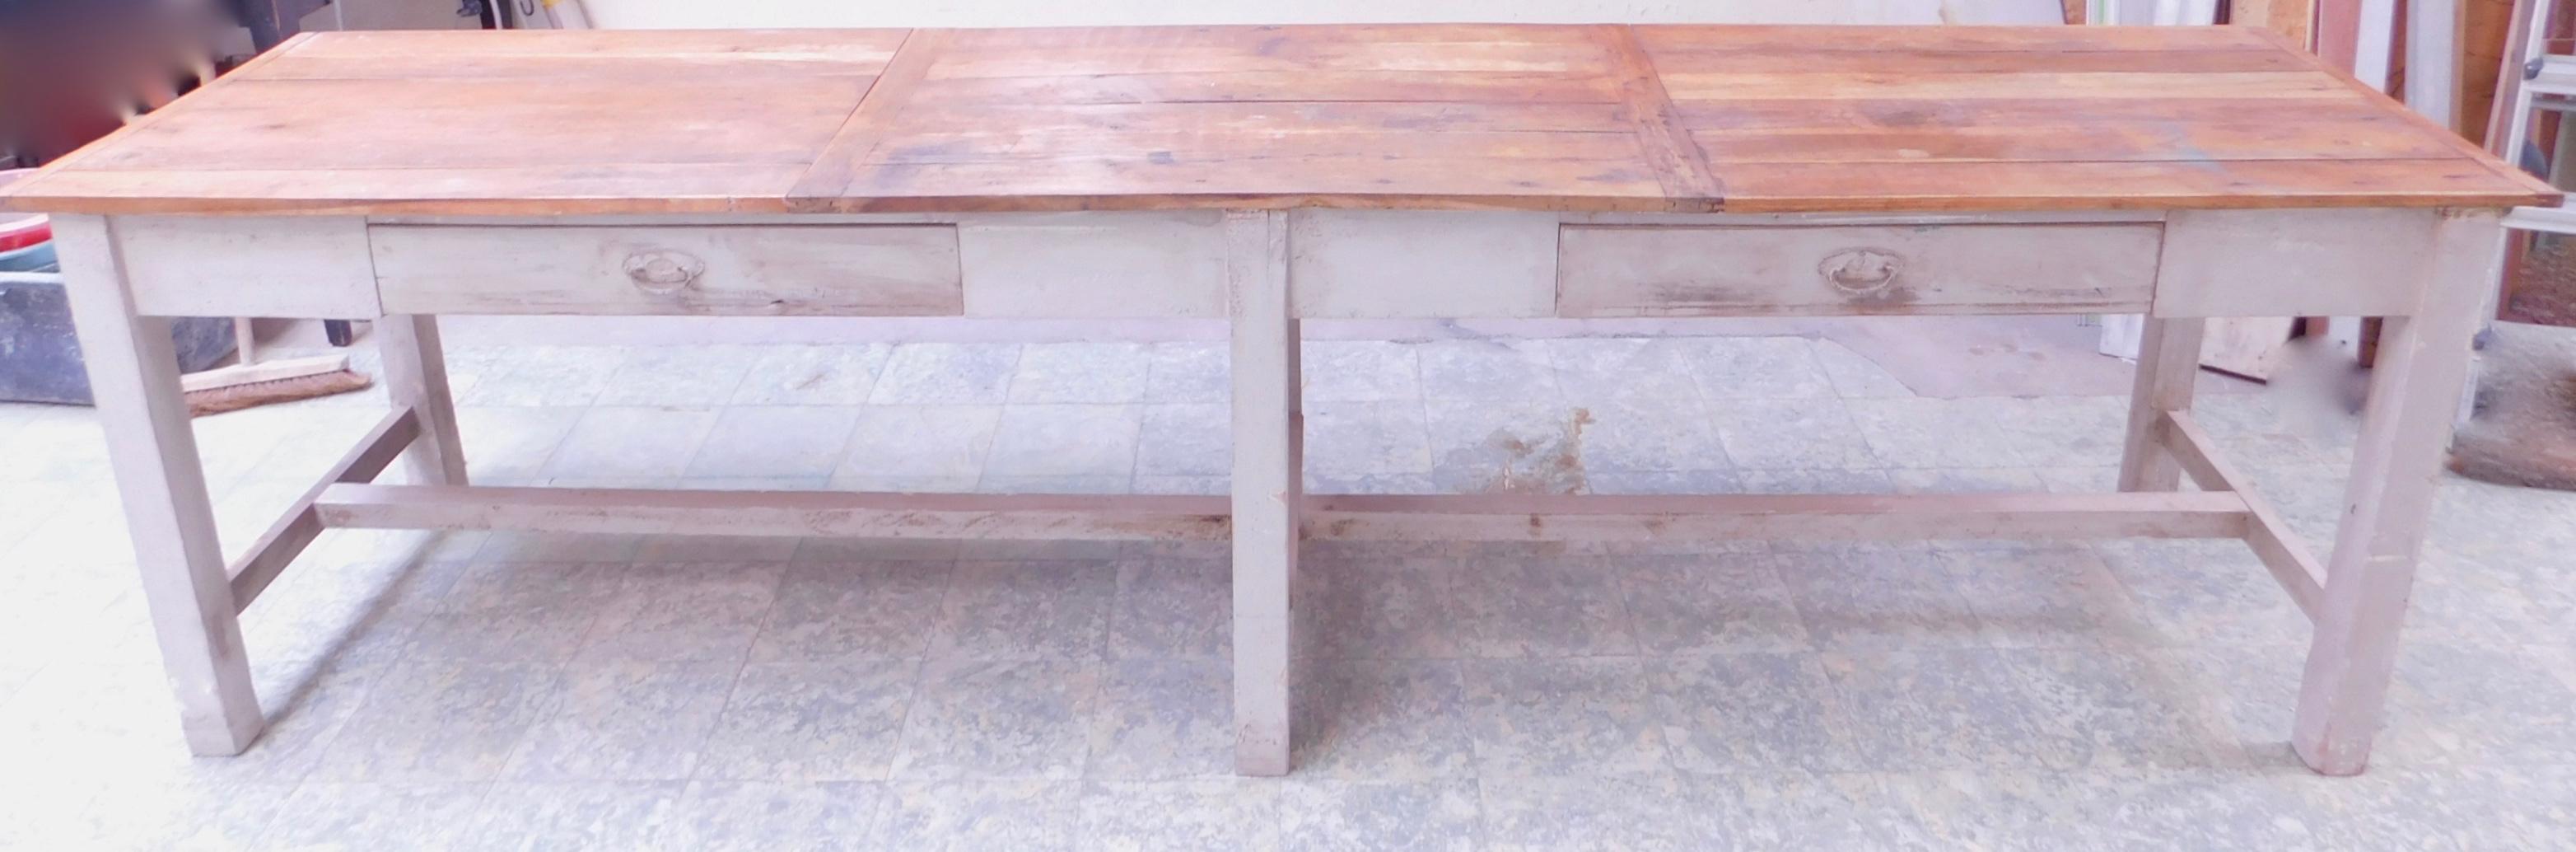 Rustic Hungarian farmhouse table with two-drawers can be used for dining or as a long console table.
Retaining the original handles and many coats of old paint (mainly ivory white)on the base and a paneled oak board top, circa 1920. 